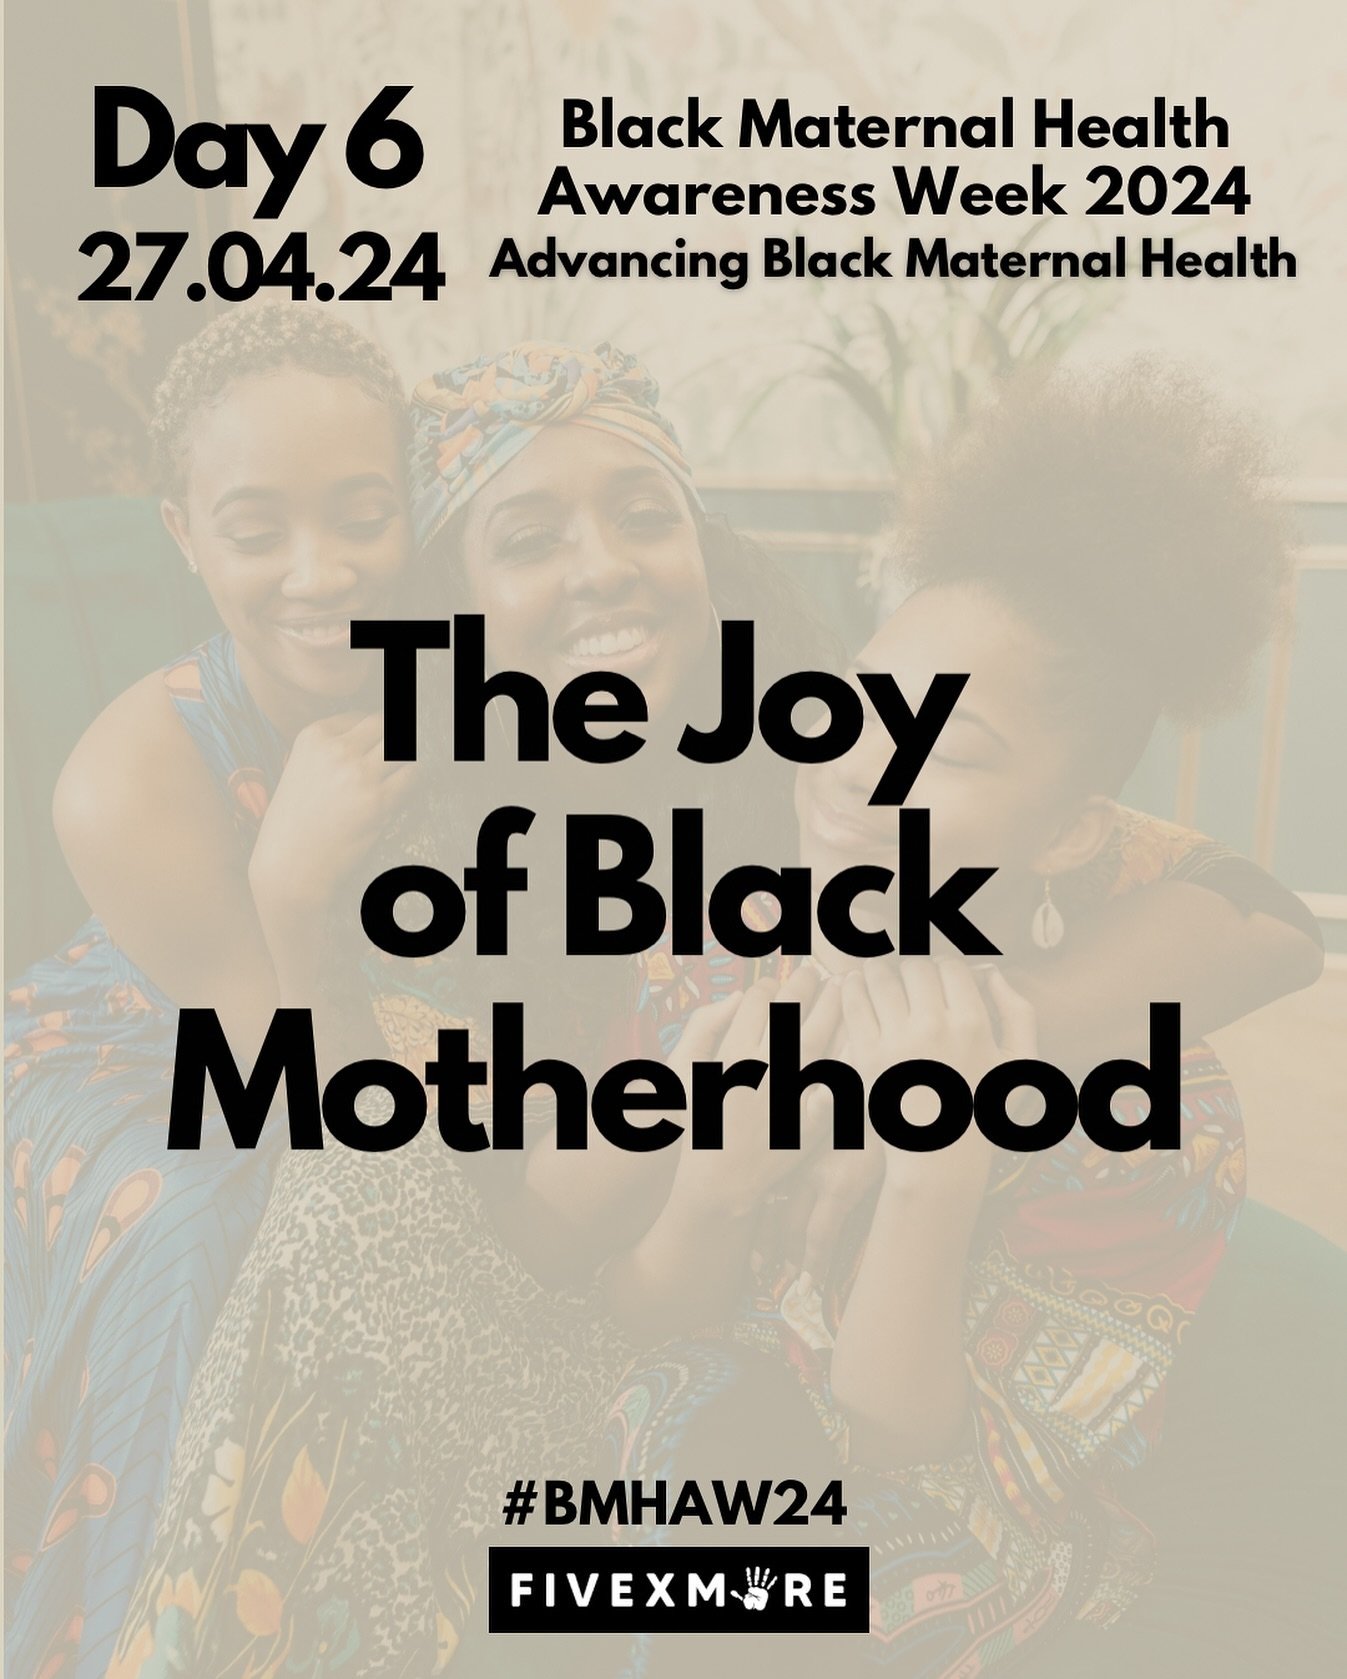 It&rsquo;s day 6 and today, we&rsquo;re celebrating the joy of Black motherhood! Join us as we share uplifting stories that showcase the beautiful and empowering birth experiences of Black women and birthing people. 

Not all journeys are the same, a